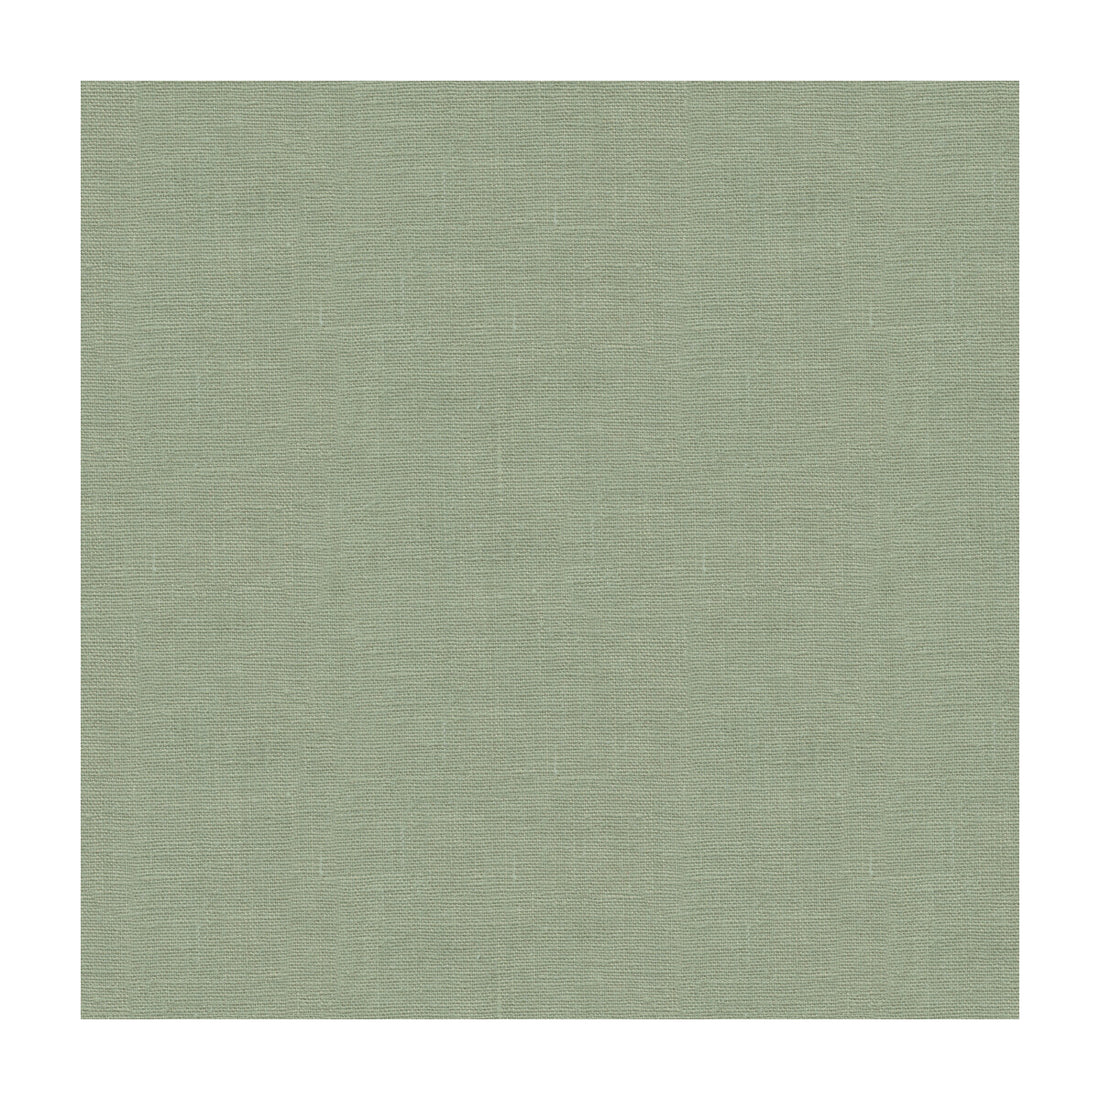 Dublin fabric in leaf color - pattern 32344.30.0 - by Kravet Basics in the Perfect Plains collection